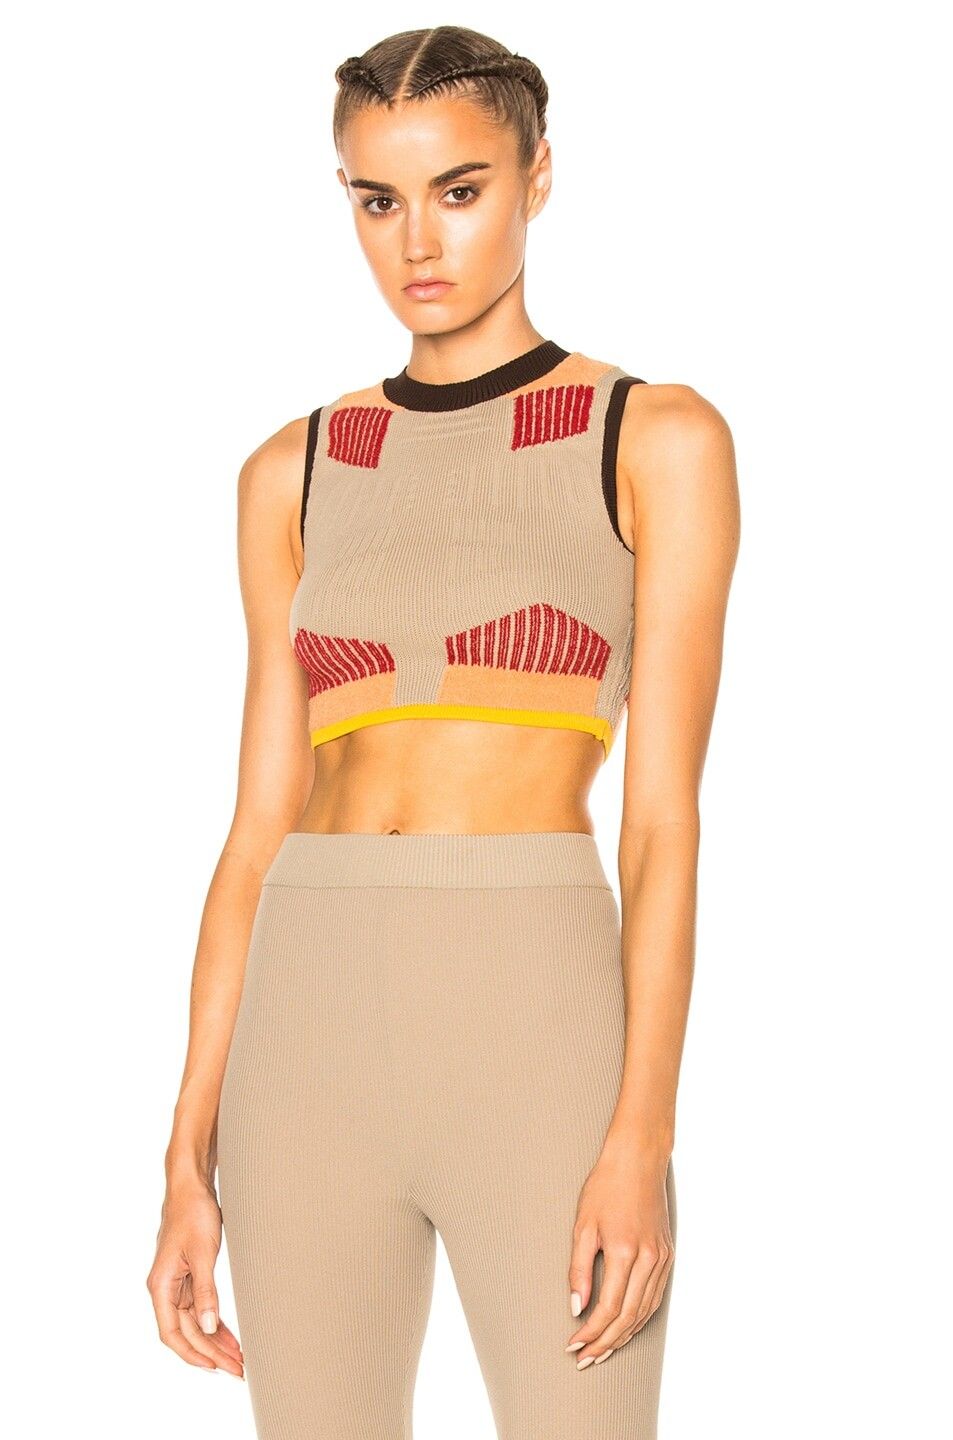 Yeezy Season YEEZY Season 3 - Sock Knit Graphic Crop Top Knitted Size XS / US 0-2 / IT 36-38 - 2 Preview